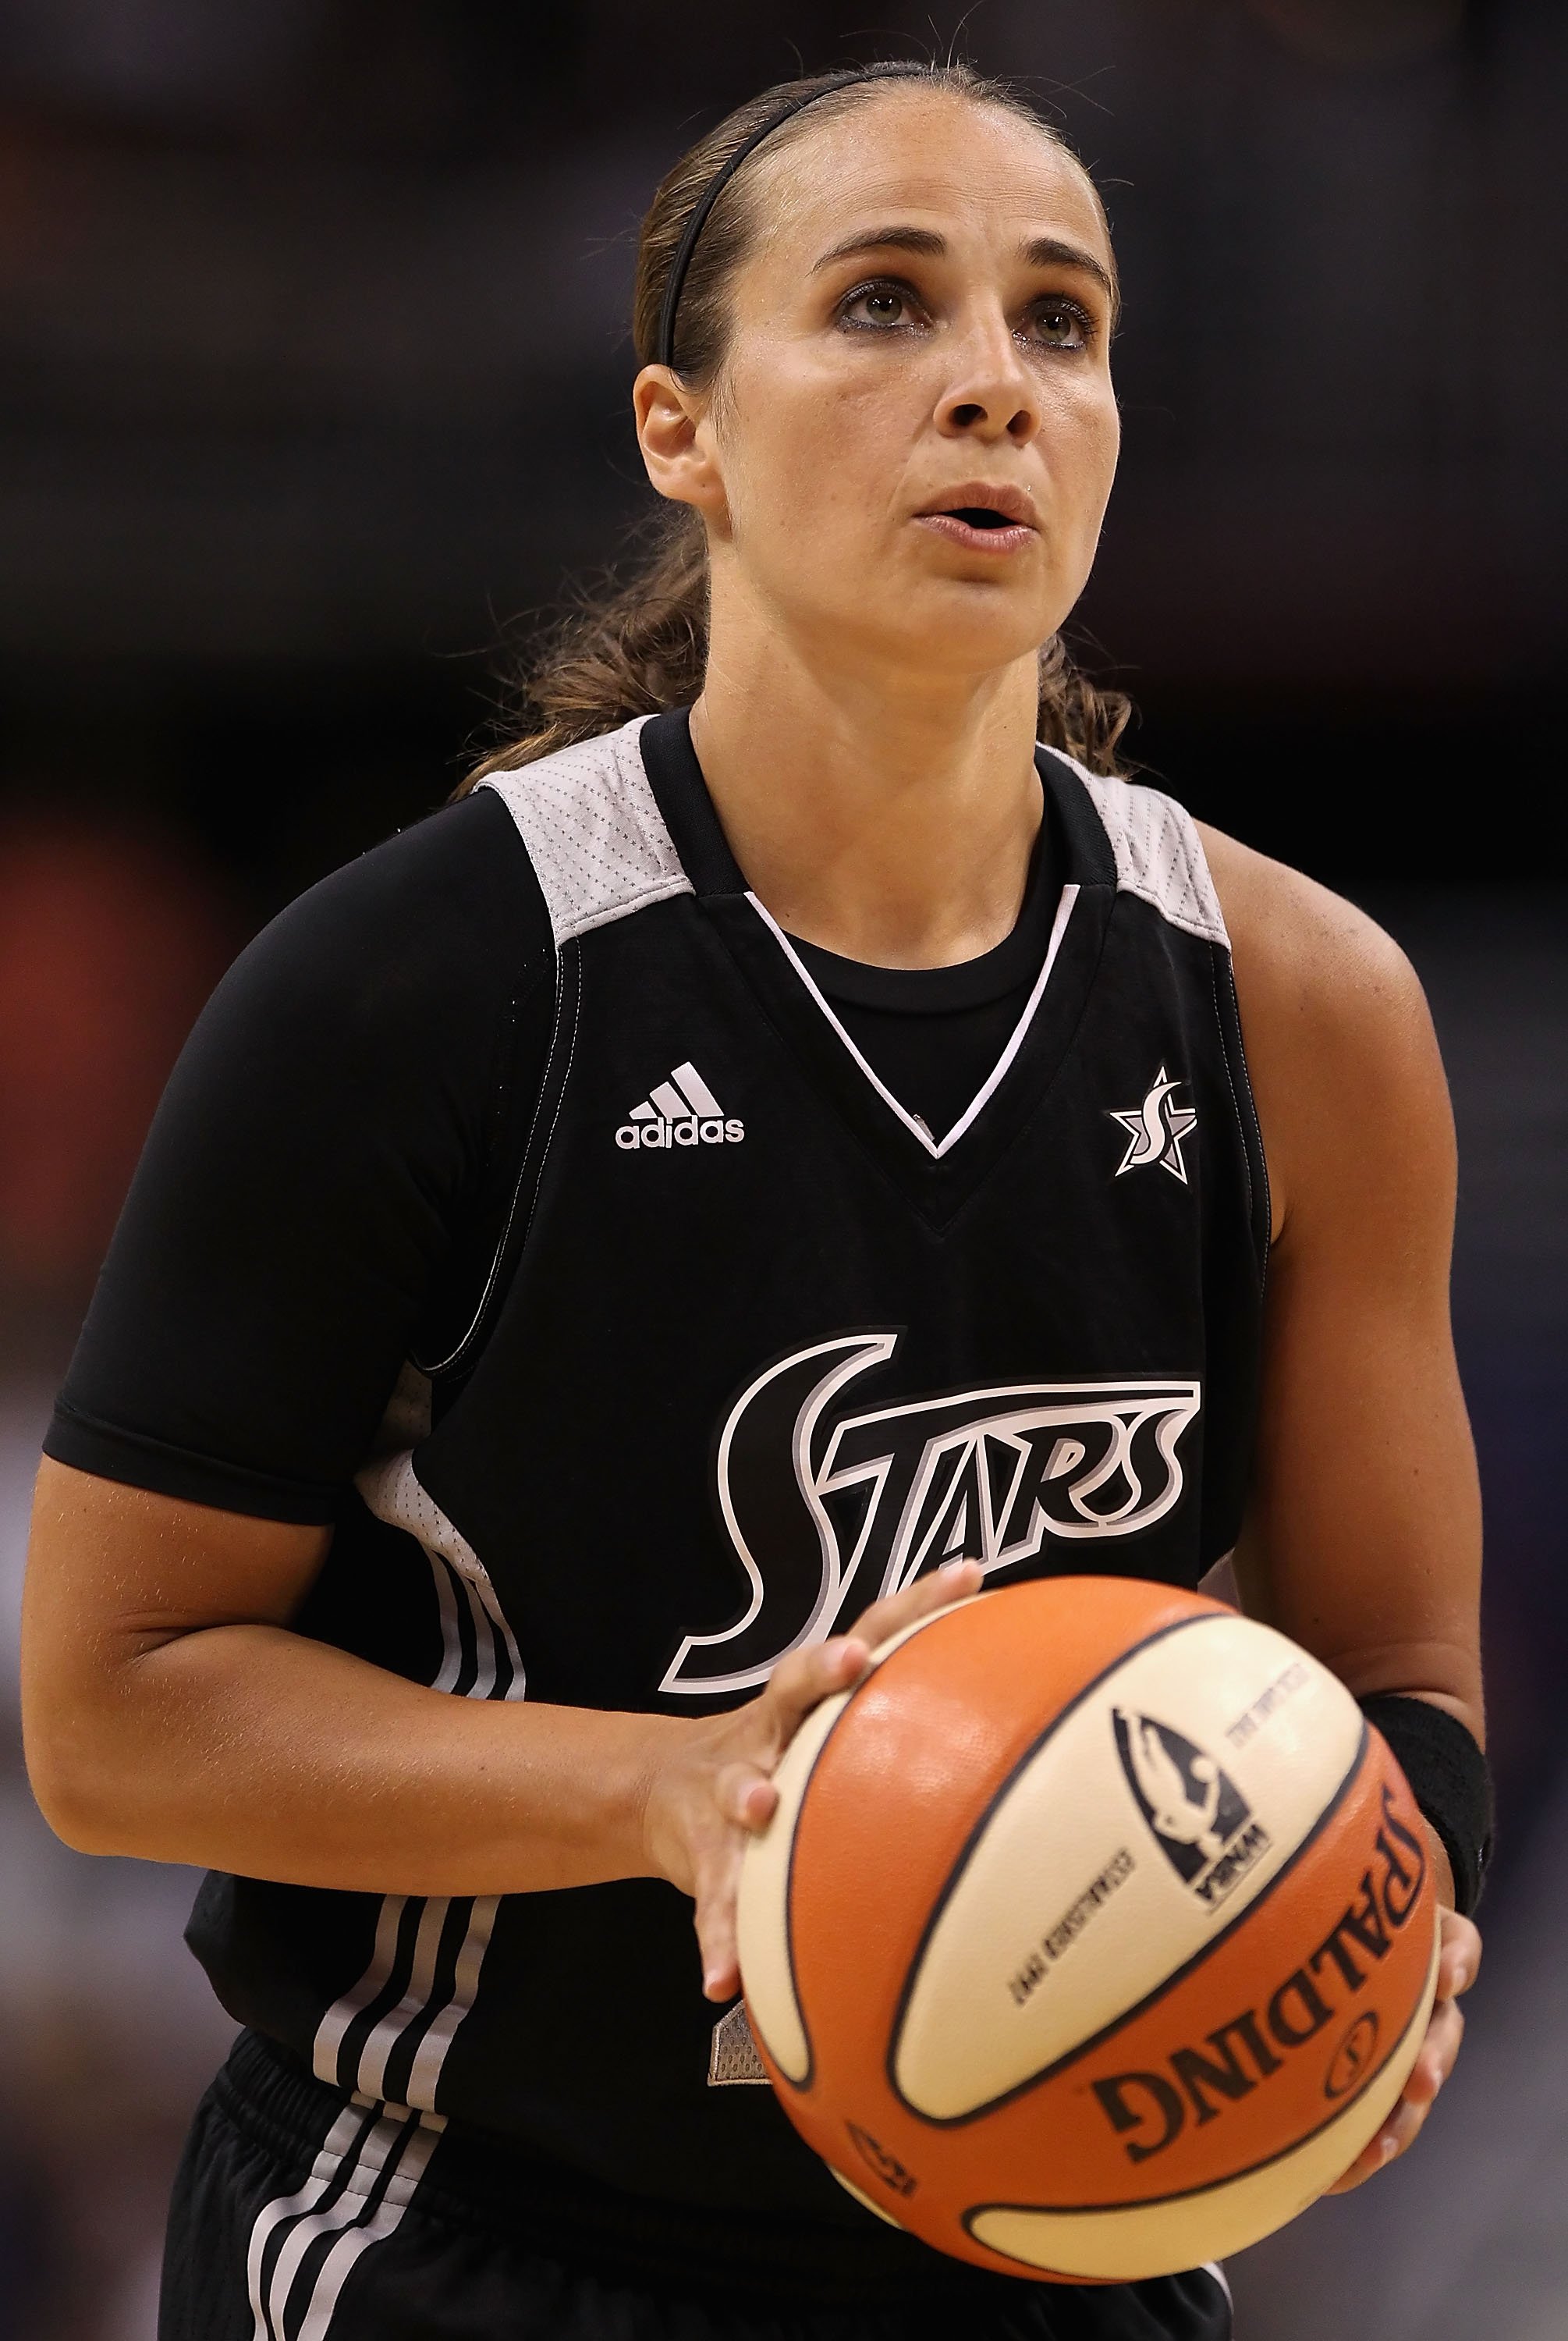 Becky Hammon #25 of the San Antonio Silver Stars shoots a free throw shot during the WNBA game against the Phoenix Mercury at US Airways Center on August 20, 2011 in Phoenix, Arizona. The Mercury defeated the Silver Stars 87-81.  NOTE TO USER: User expressly acknowledges and agrees that, by downloading and or using this photograph, User is consenting to the terms and conditions of the Getty Images License Agreement.  (Photo by Christian Petersen/Getty Images) (Christian Petersen—Getty Images)